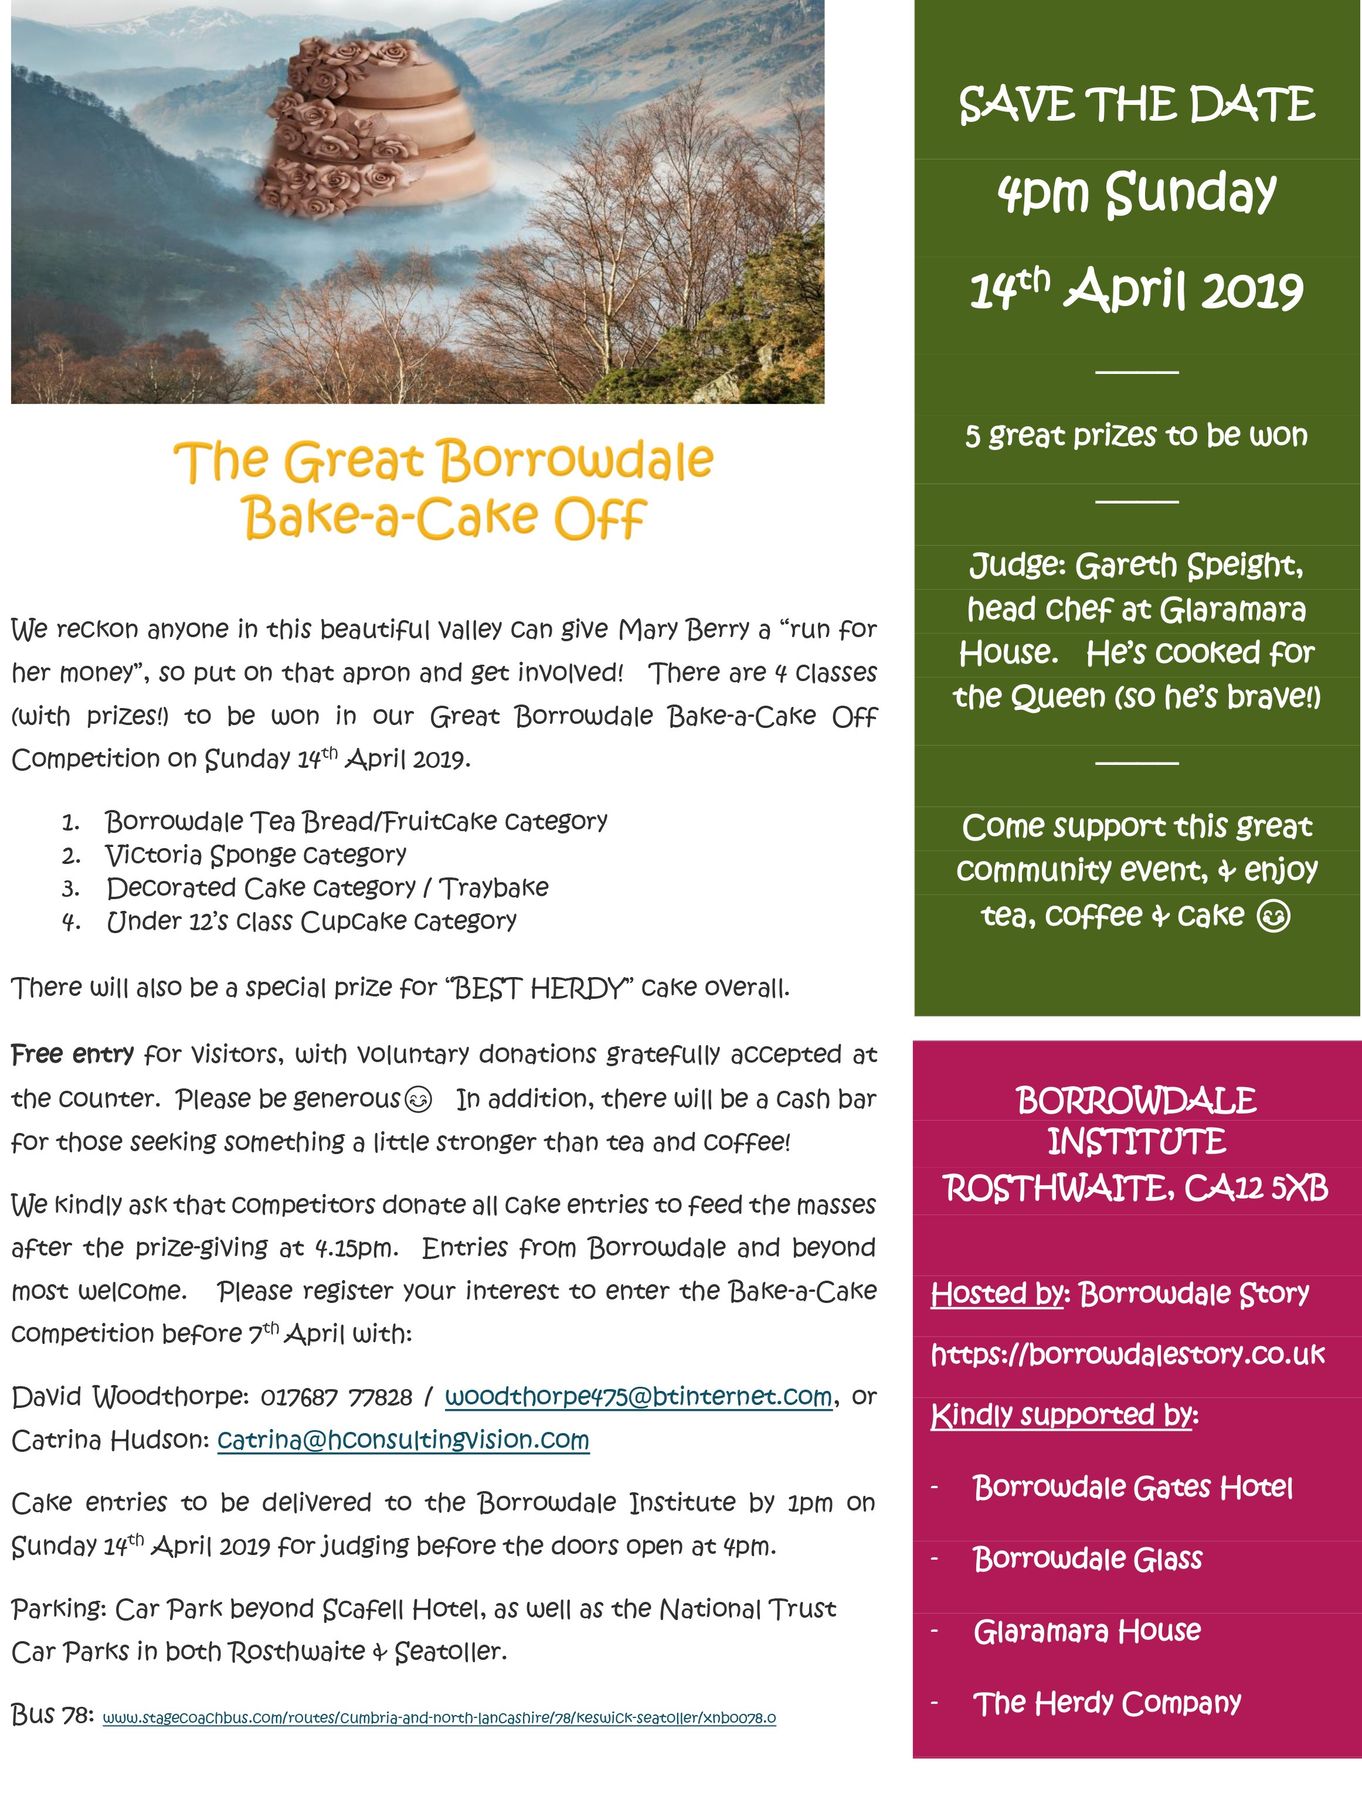 The Great Borrowdale Bake-a-Cake Off 